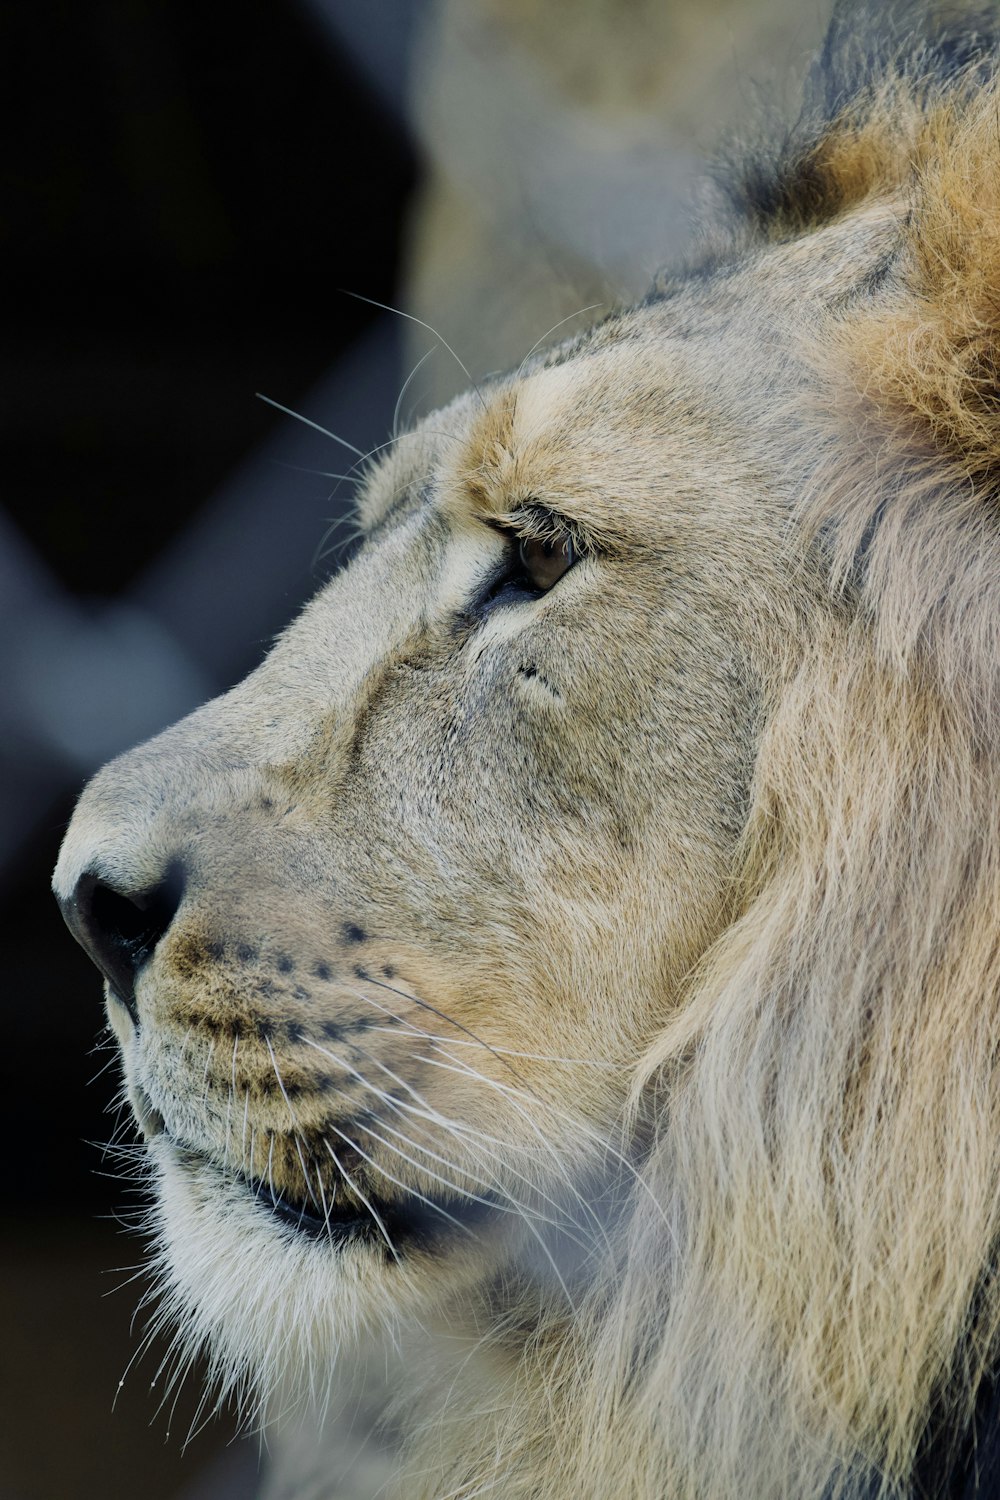 a close up of a lion's face with a chain link fence in the